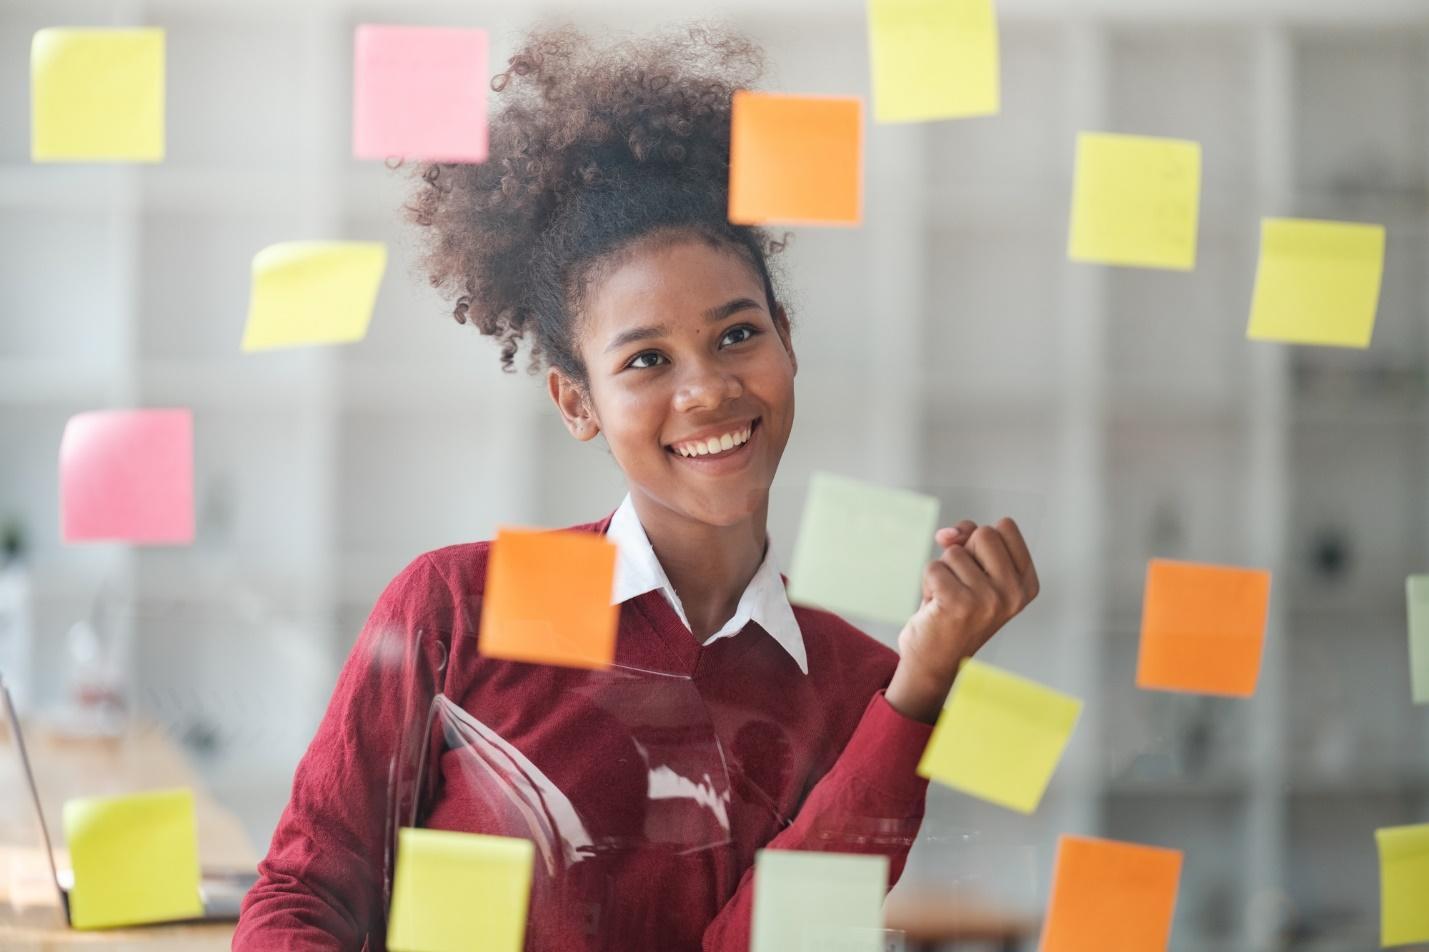 A smiling employee sits in front of a window with brightly-colored sticky notes on it as she improves her productivity under employee productivity monitoring.